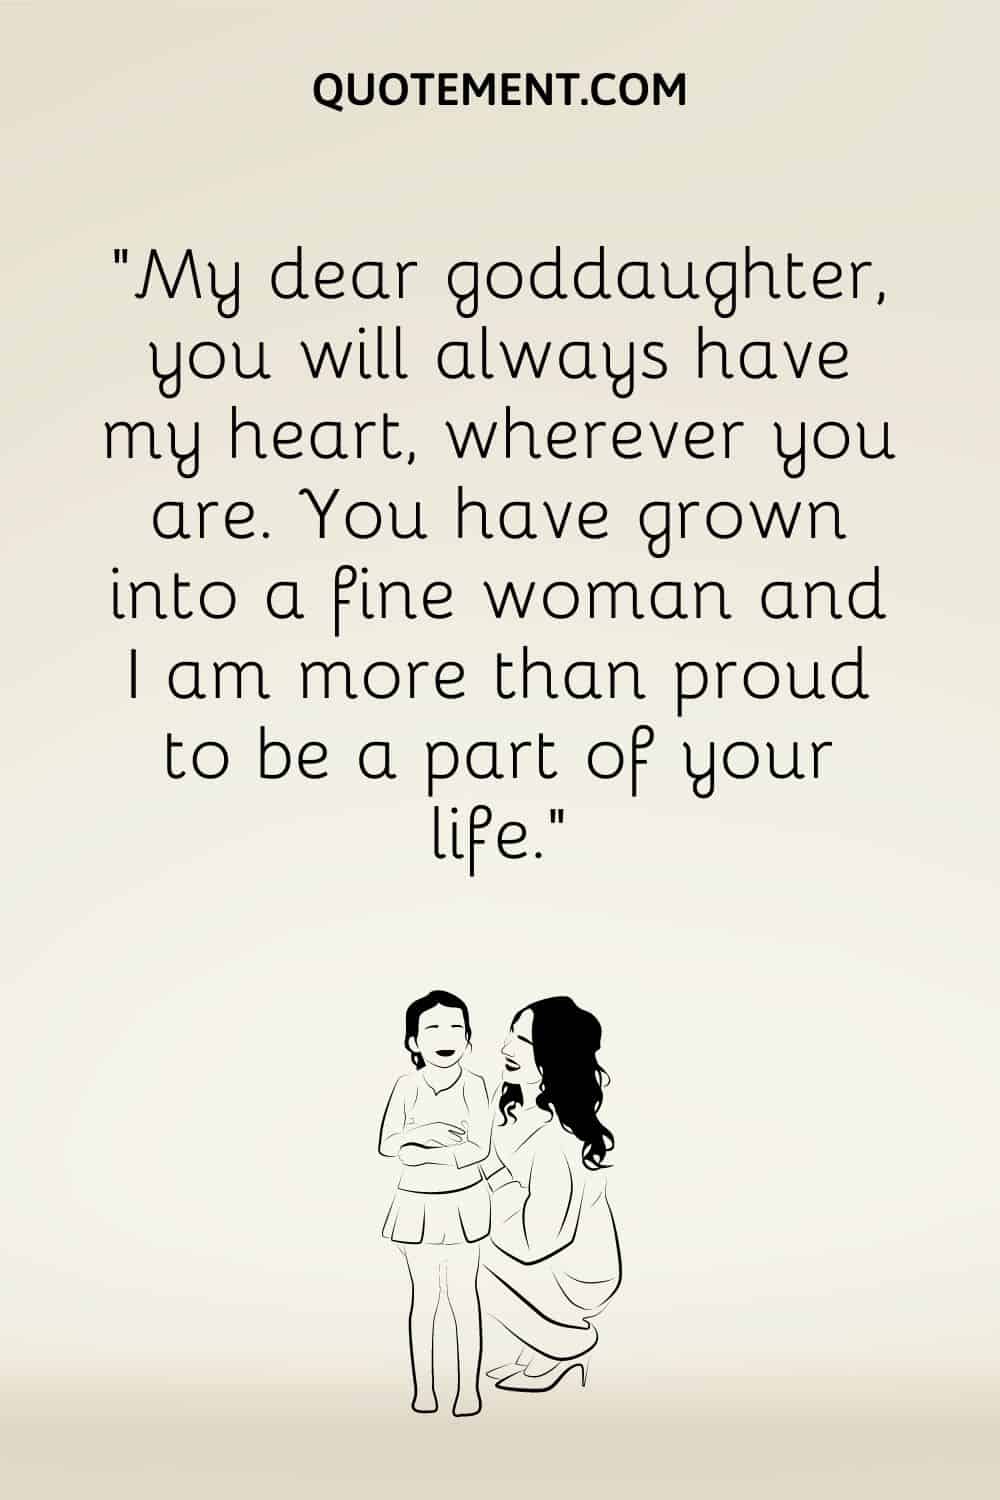 “My dear goddaughter, you will always have my heart, wherever you are. You have grown into a fine woman and I am more than proud to be a part of your life.”